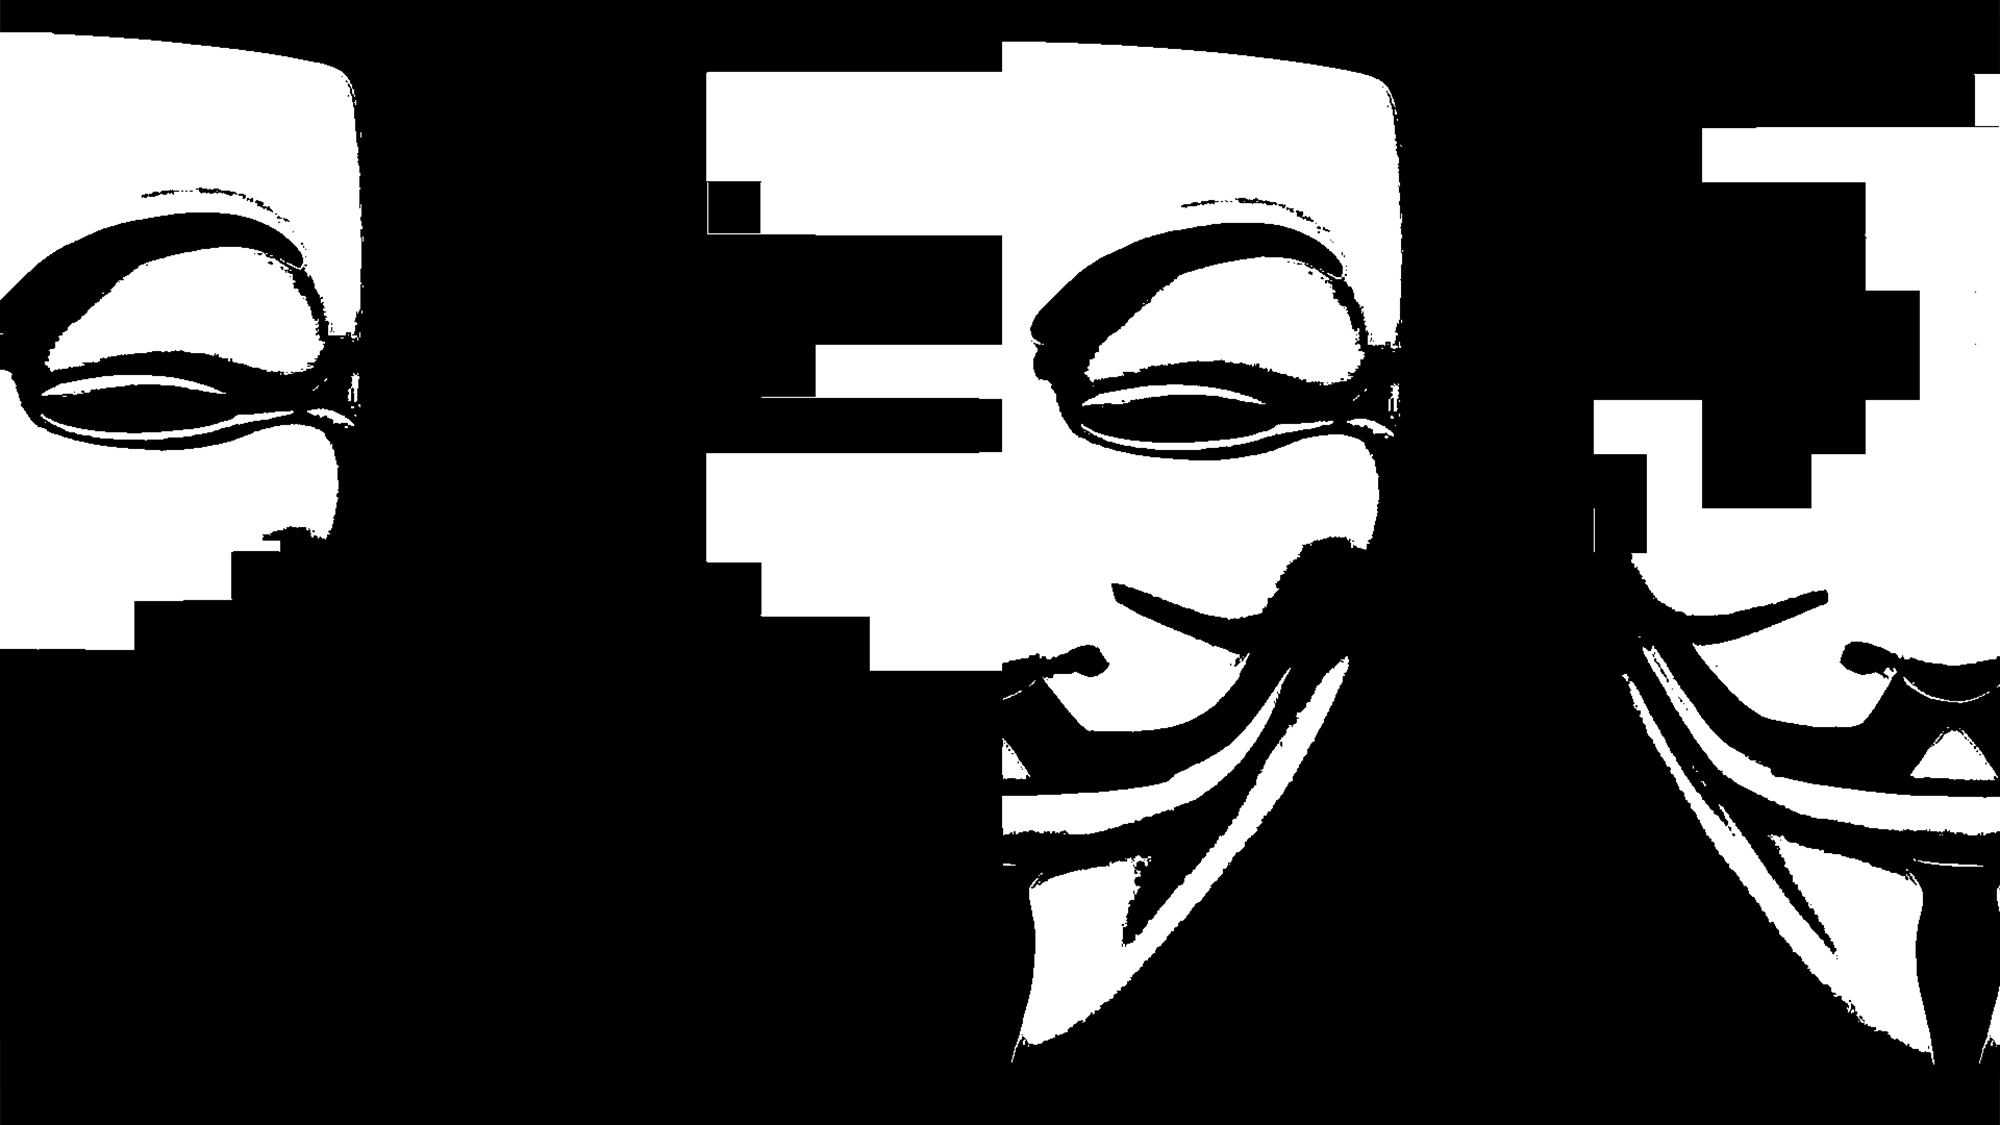 The Hacker Group Anonymous Returns The Atlantic - roblox exploiting music video trolling part 2